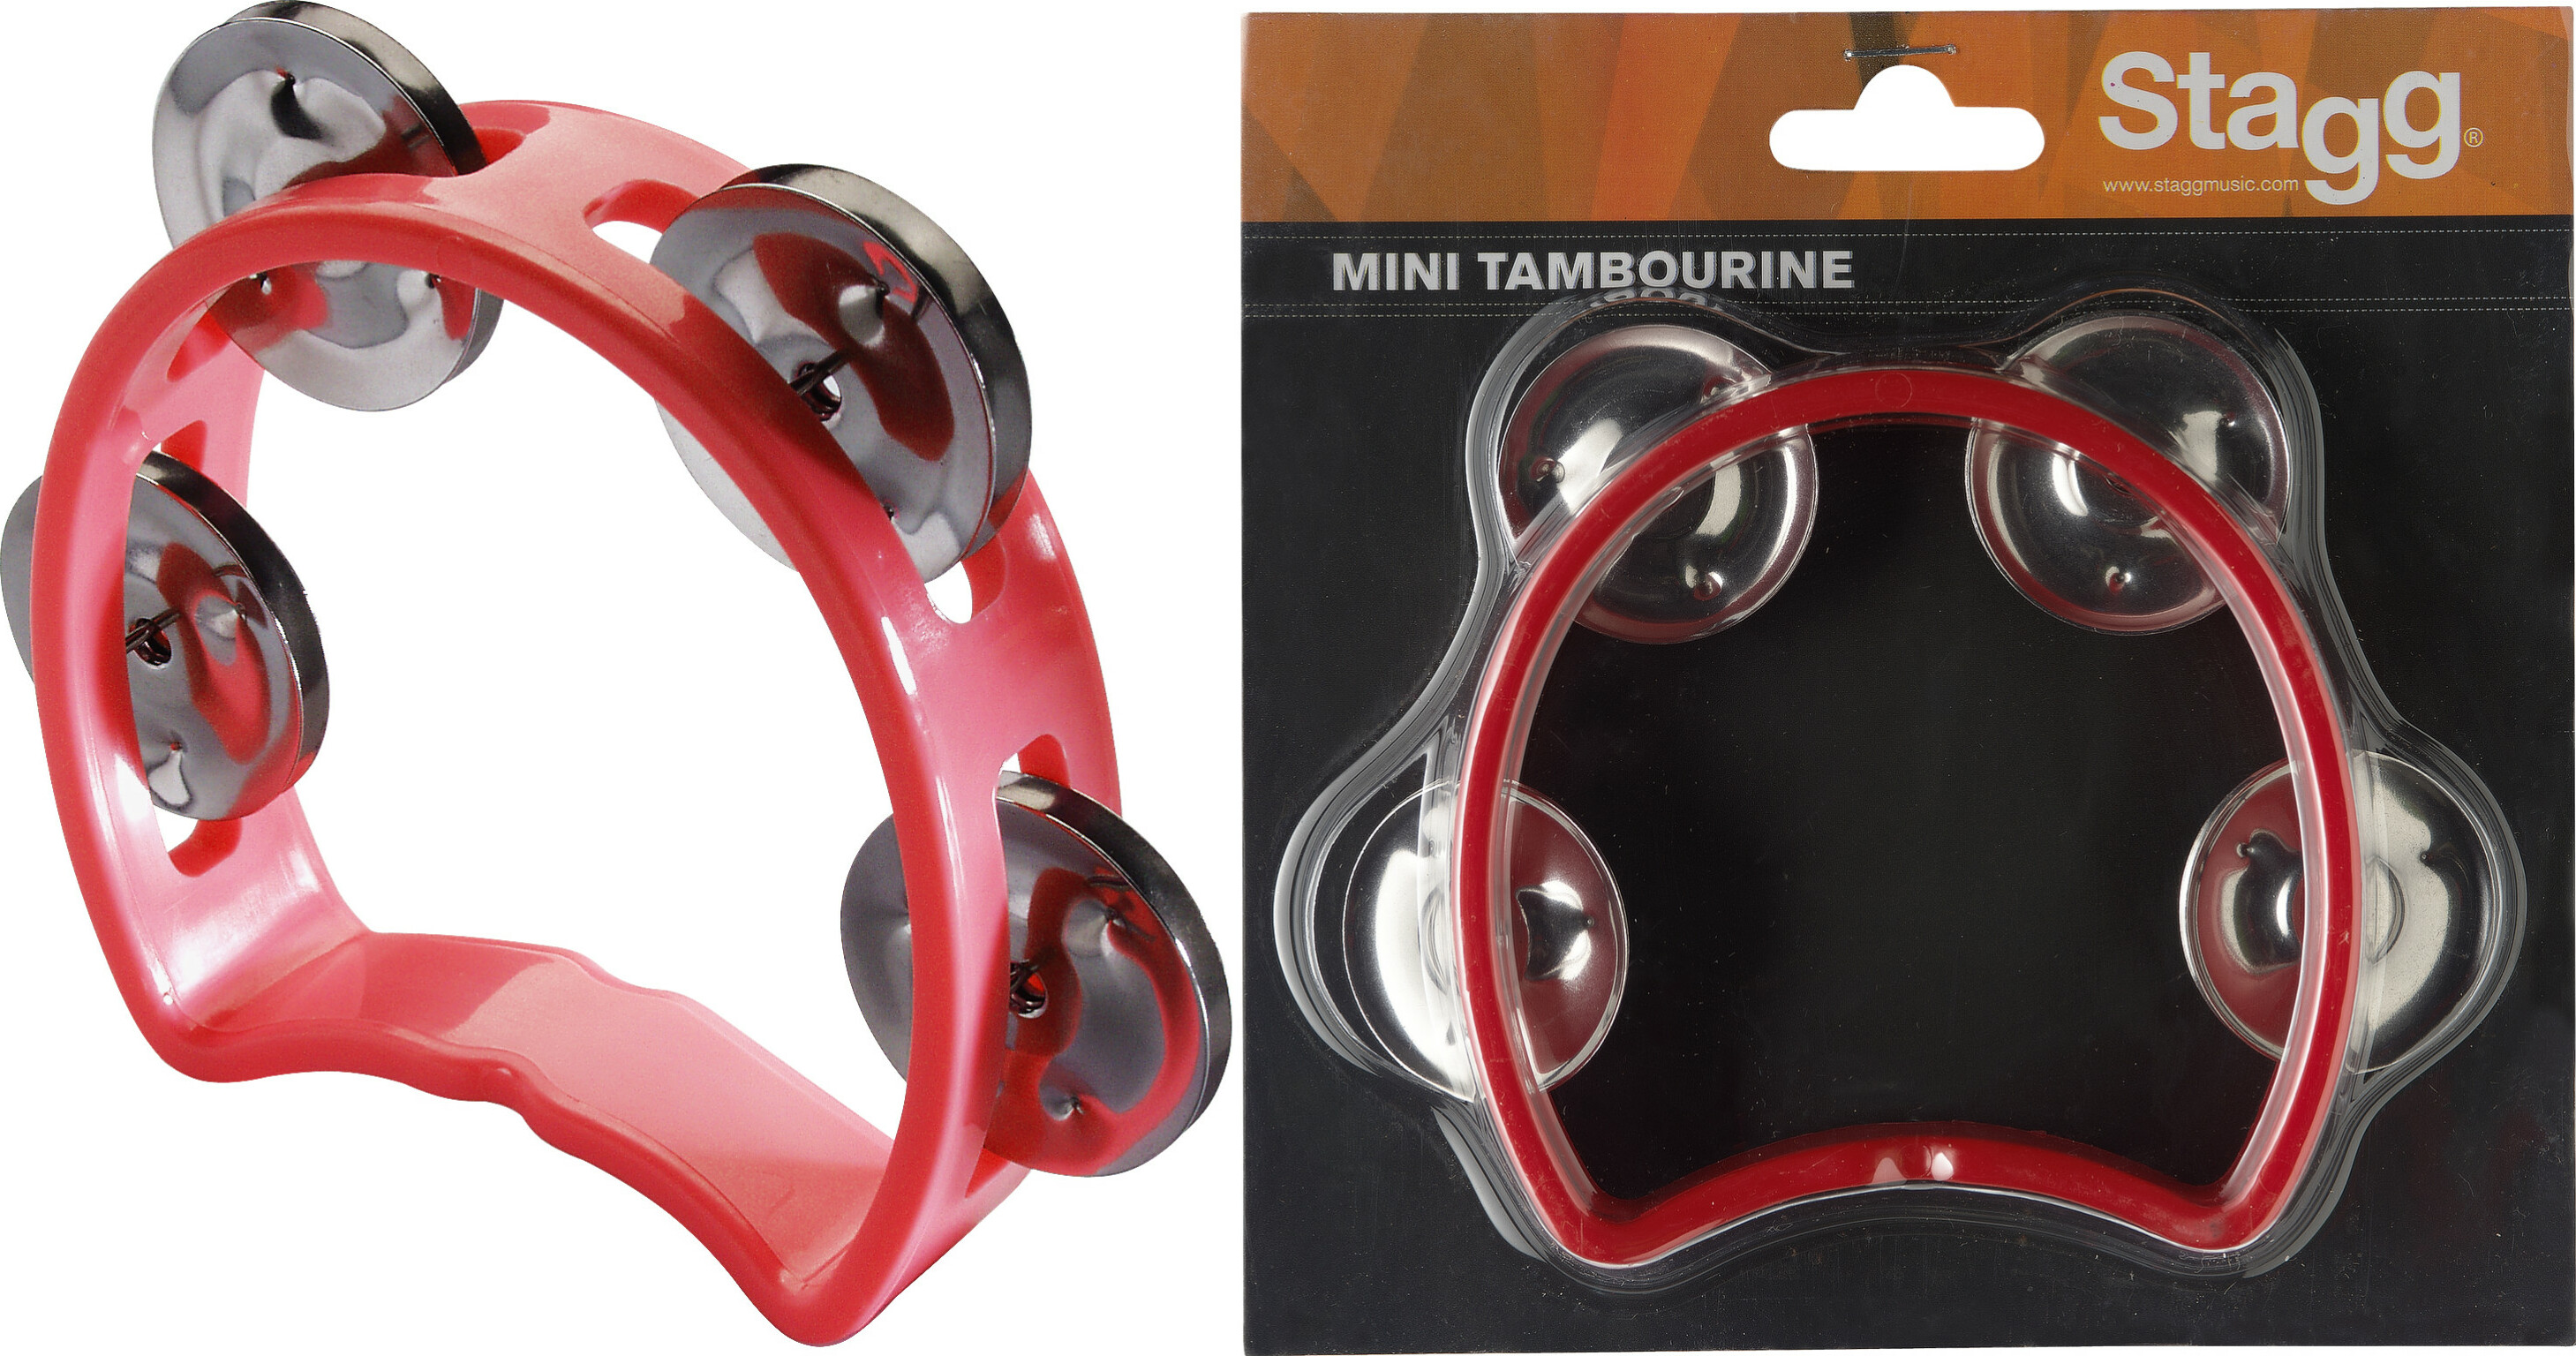 Stagg Tab-mini/rd Mini Tambourin En Plastique Avec 4 Cymbalettes Rouge - Shake percussions - Main picture